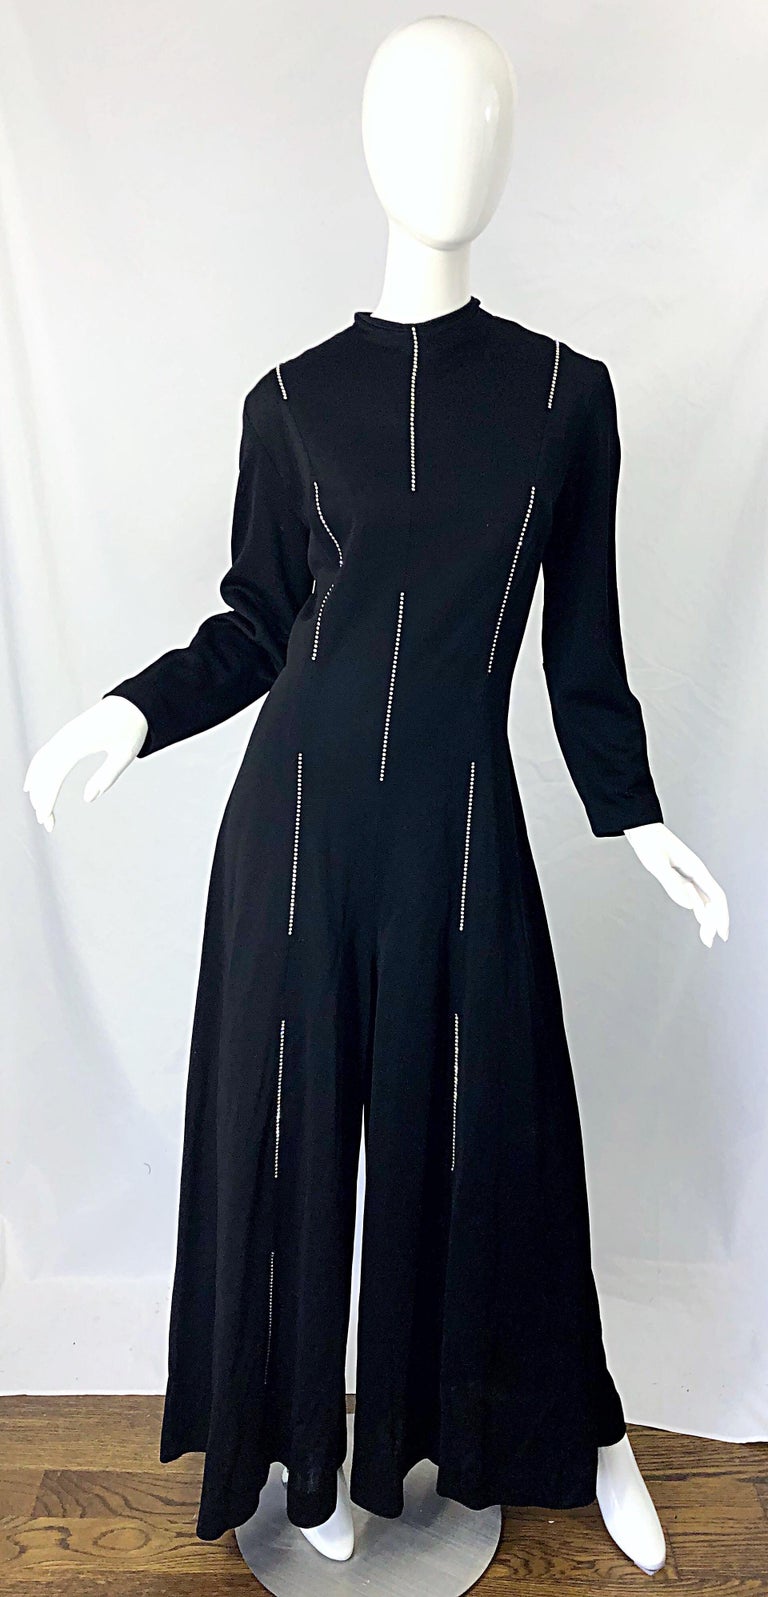 Amazing 1970s LILLIE RUBIN black knit rhinestone encrusted wide palazzo leg long sleeve jumpsuit ! Features lines of rhinestones up the front and back. Sleek tailored bodice with wide legs. Soft knit fabric offers plenty of stretch. Hidden zipper up